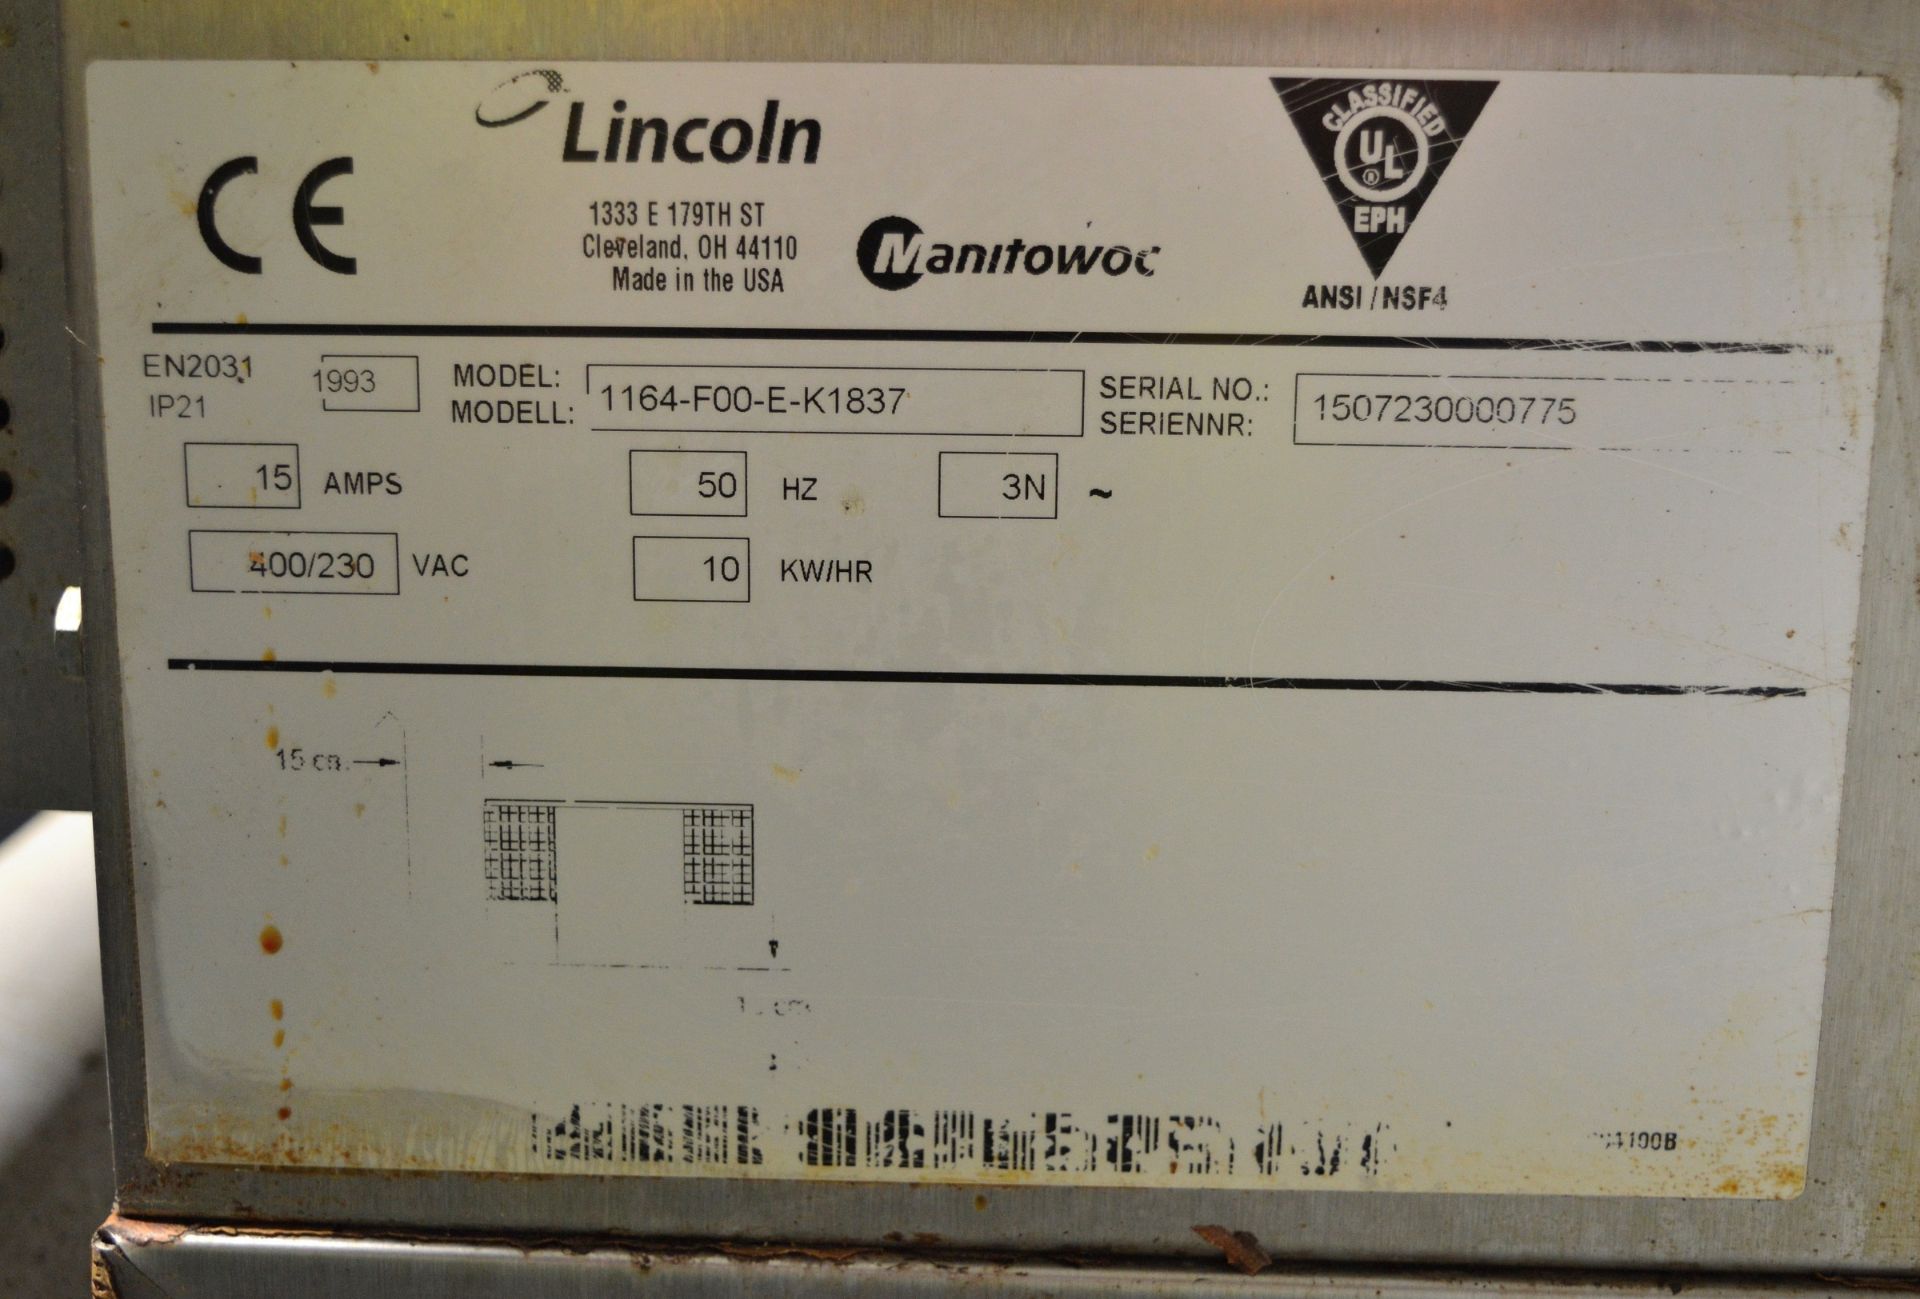 Lincoln 1164-F00-E-K1837 Electric Double Conveyor Oven - 3 Phase - Image 11 of 12